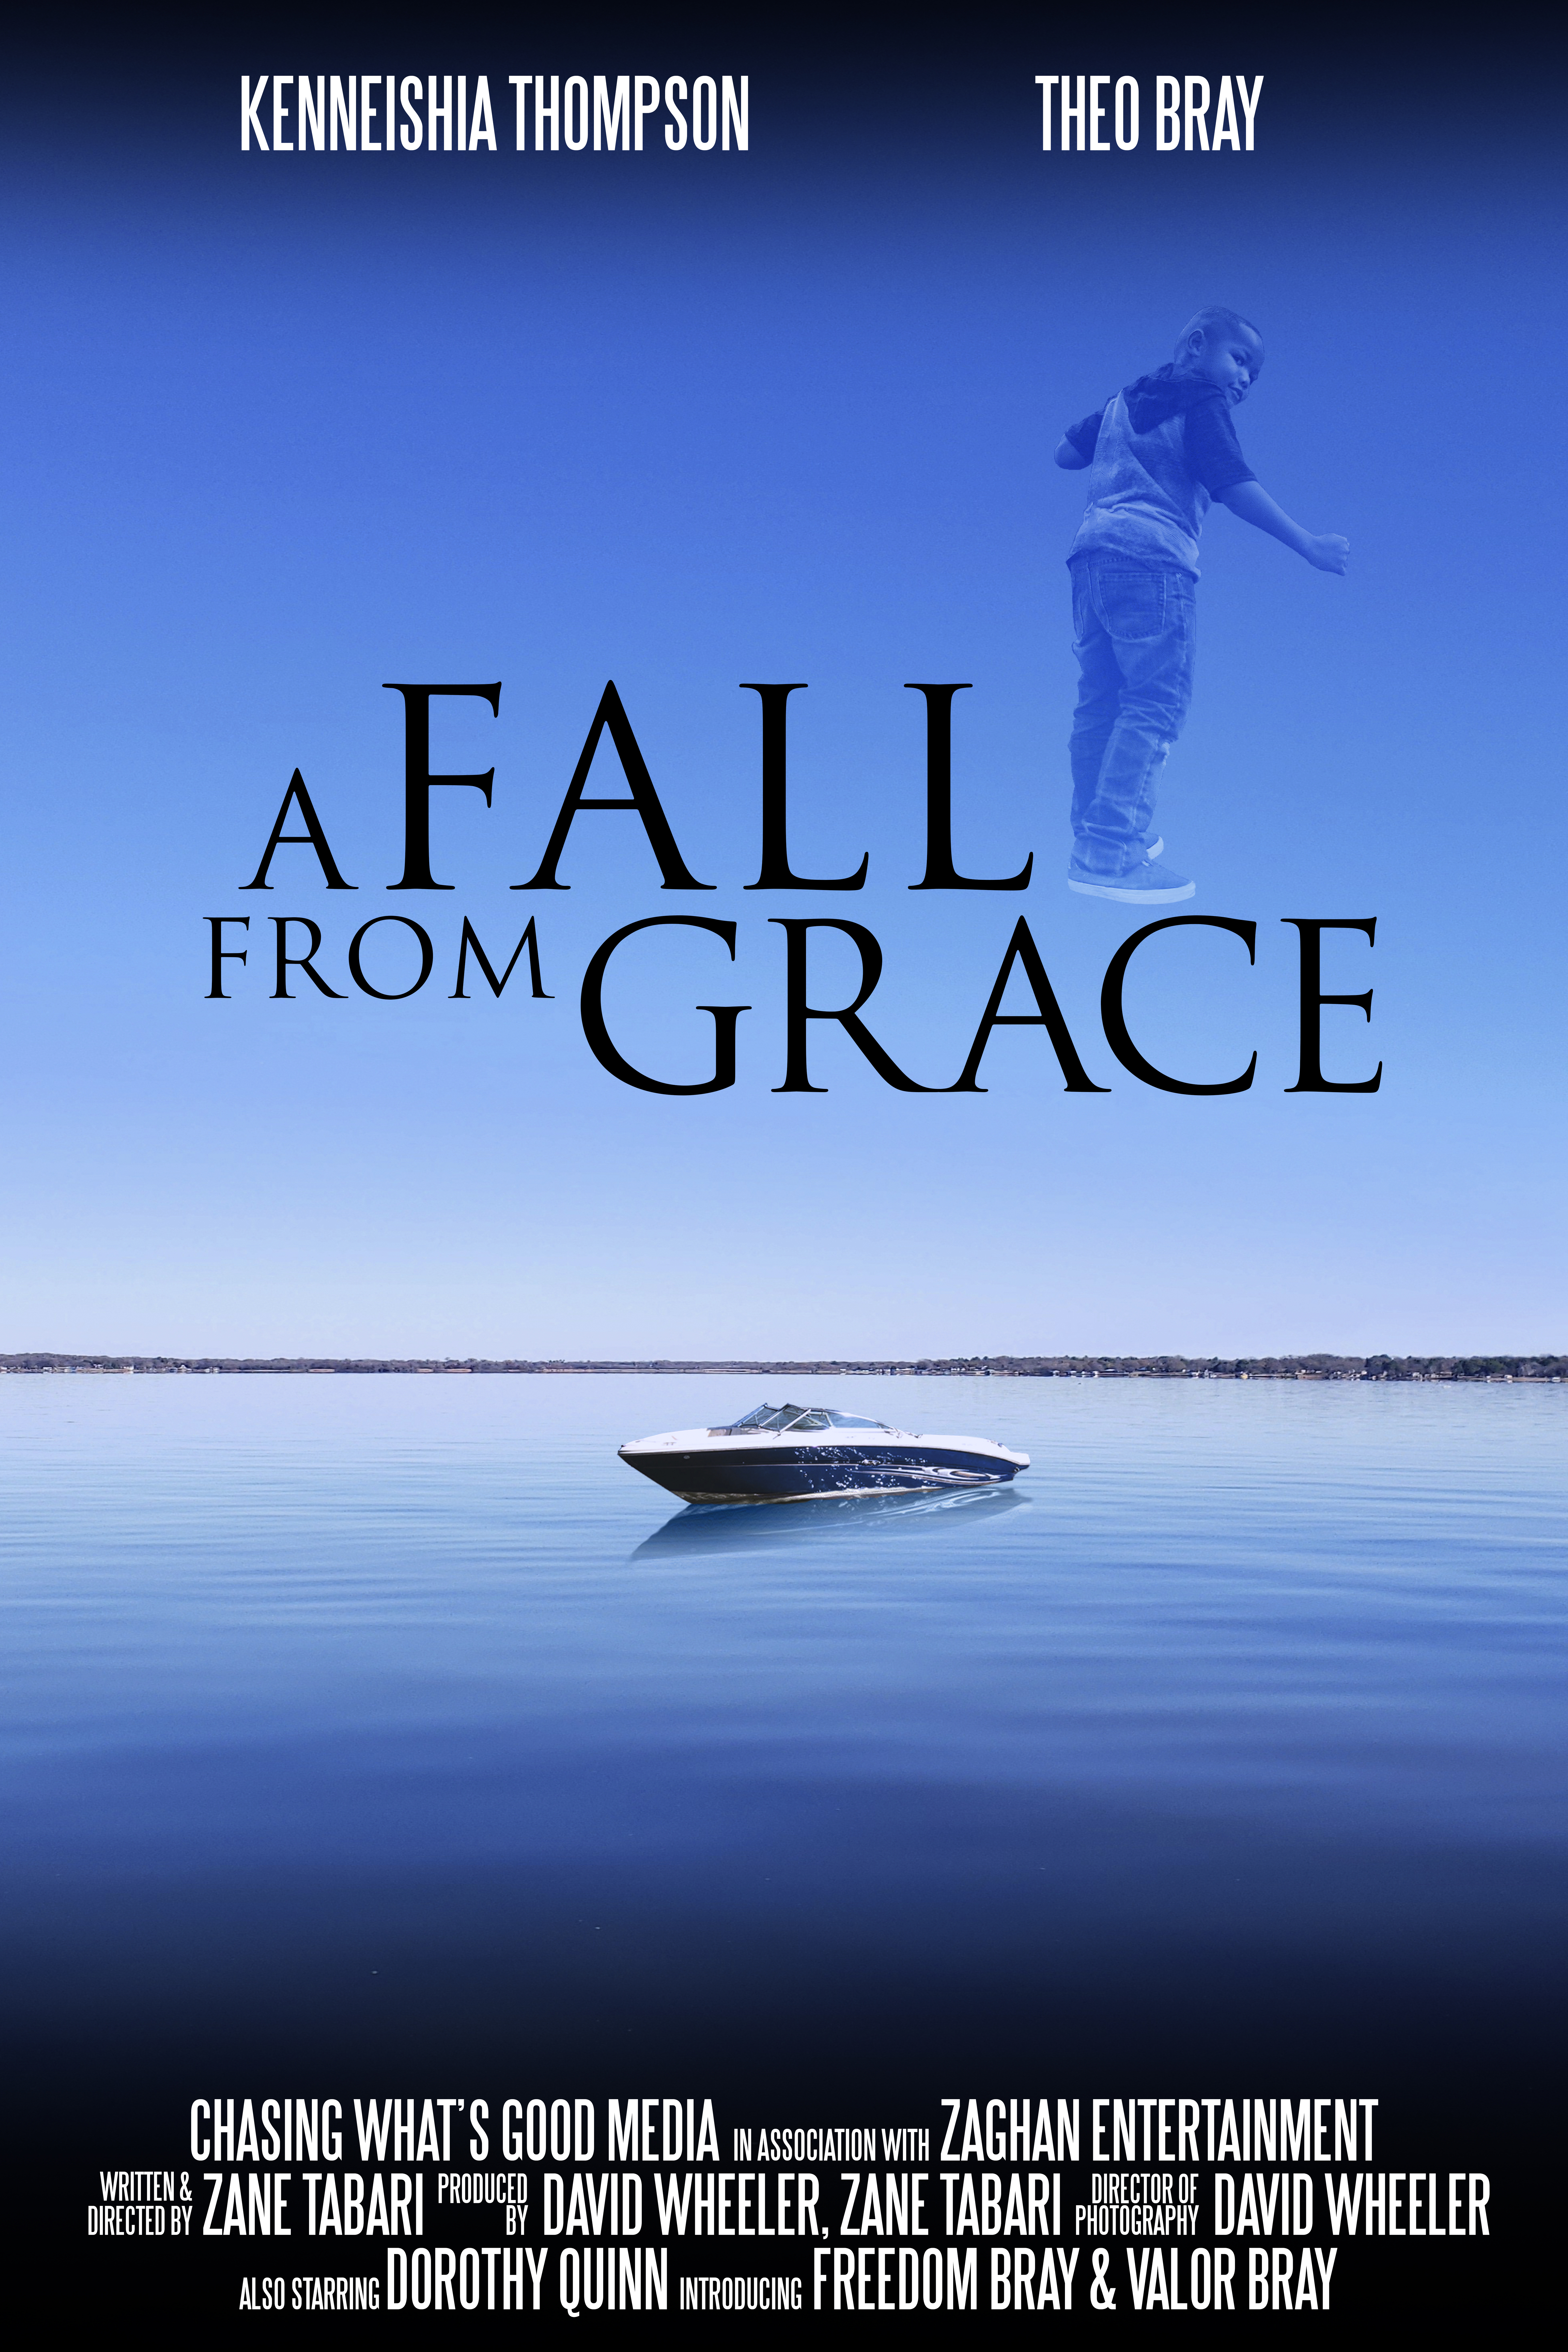 A Fall from Grace (2021)